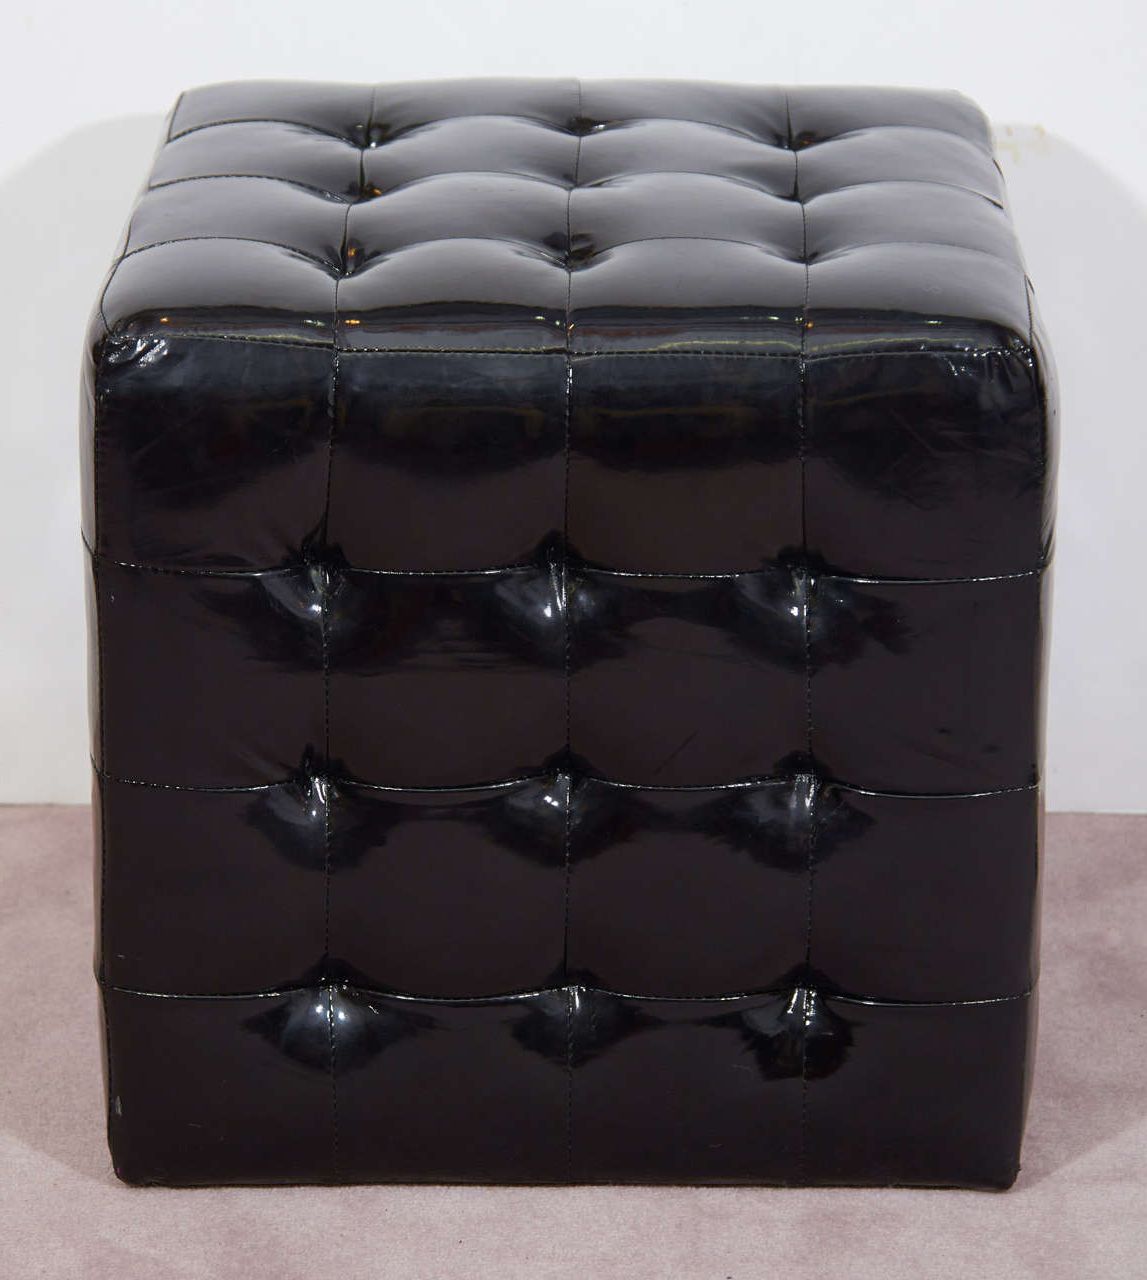 Black Wet Look Faux Leather Tufted Cube Ottomans Or Benches At 1stdibs For 2017 Black Faux Leather Column Tufted Ottomans (View 9 of 10)